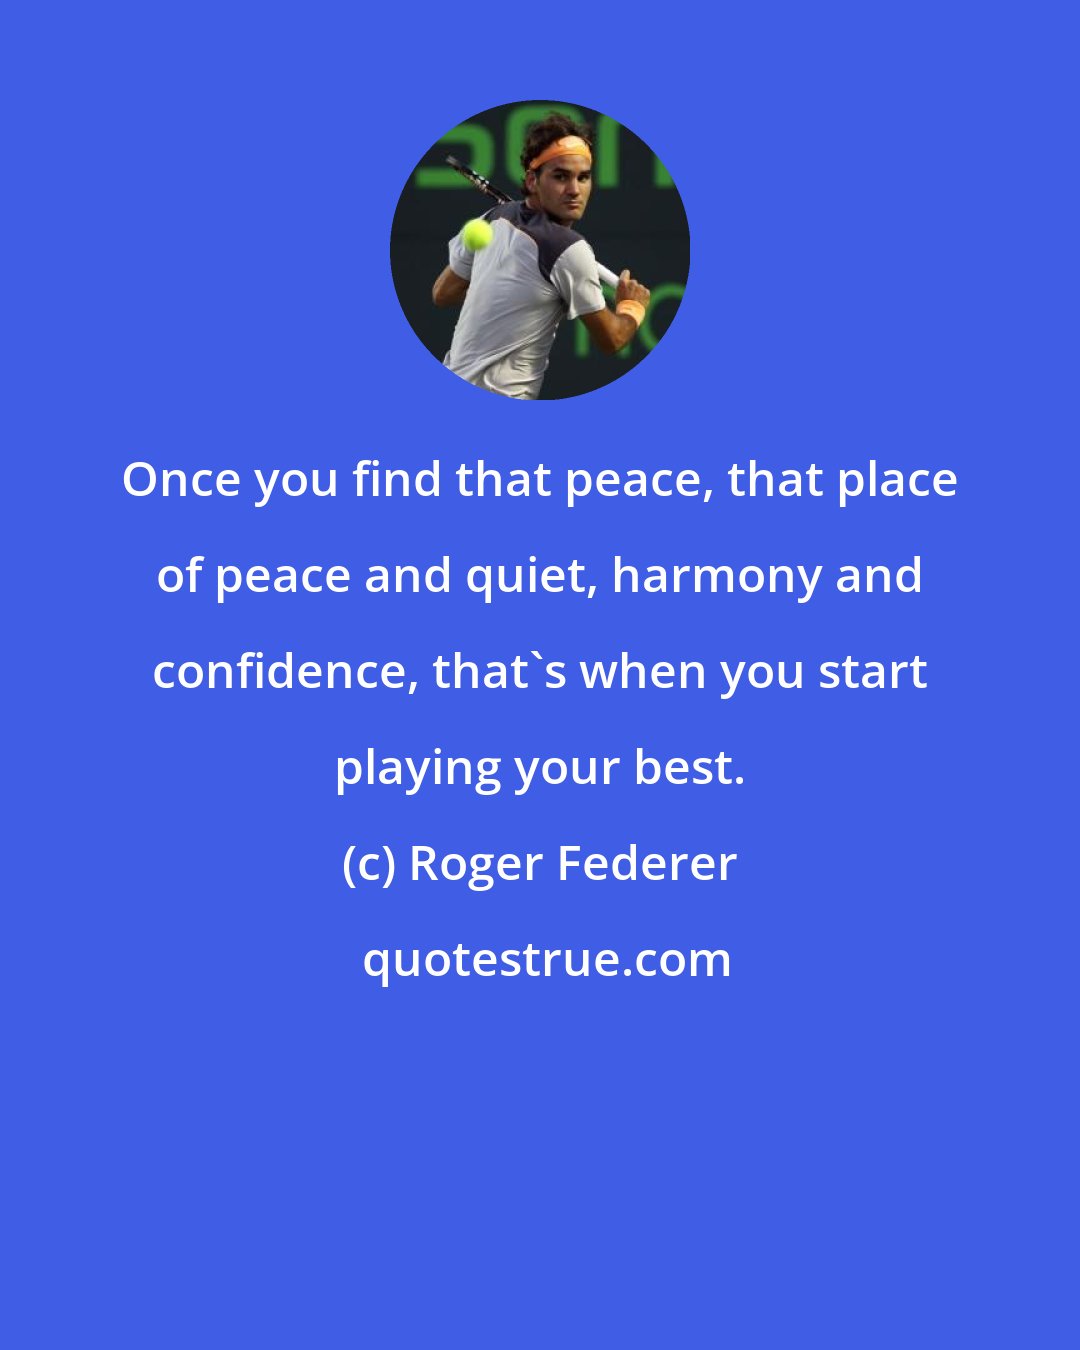 Roger Federer: Once you find that peace, that place of peace and quiet, harmony and confidence, that's when you start playing your best.